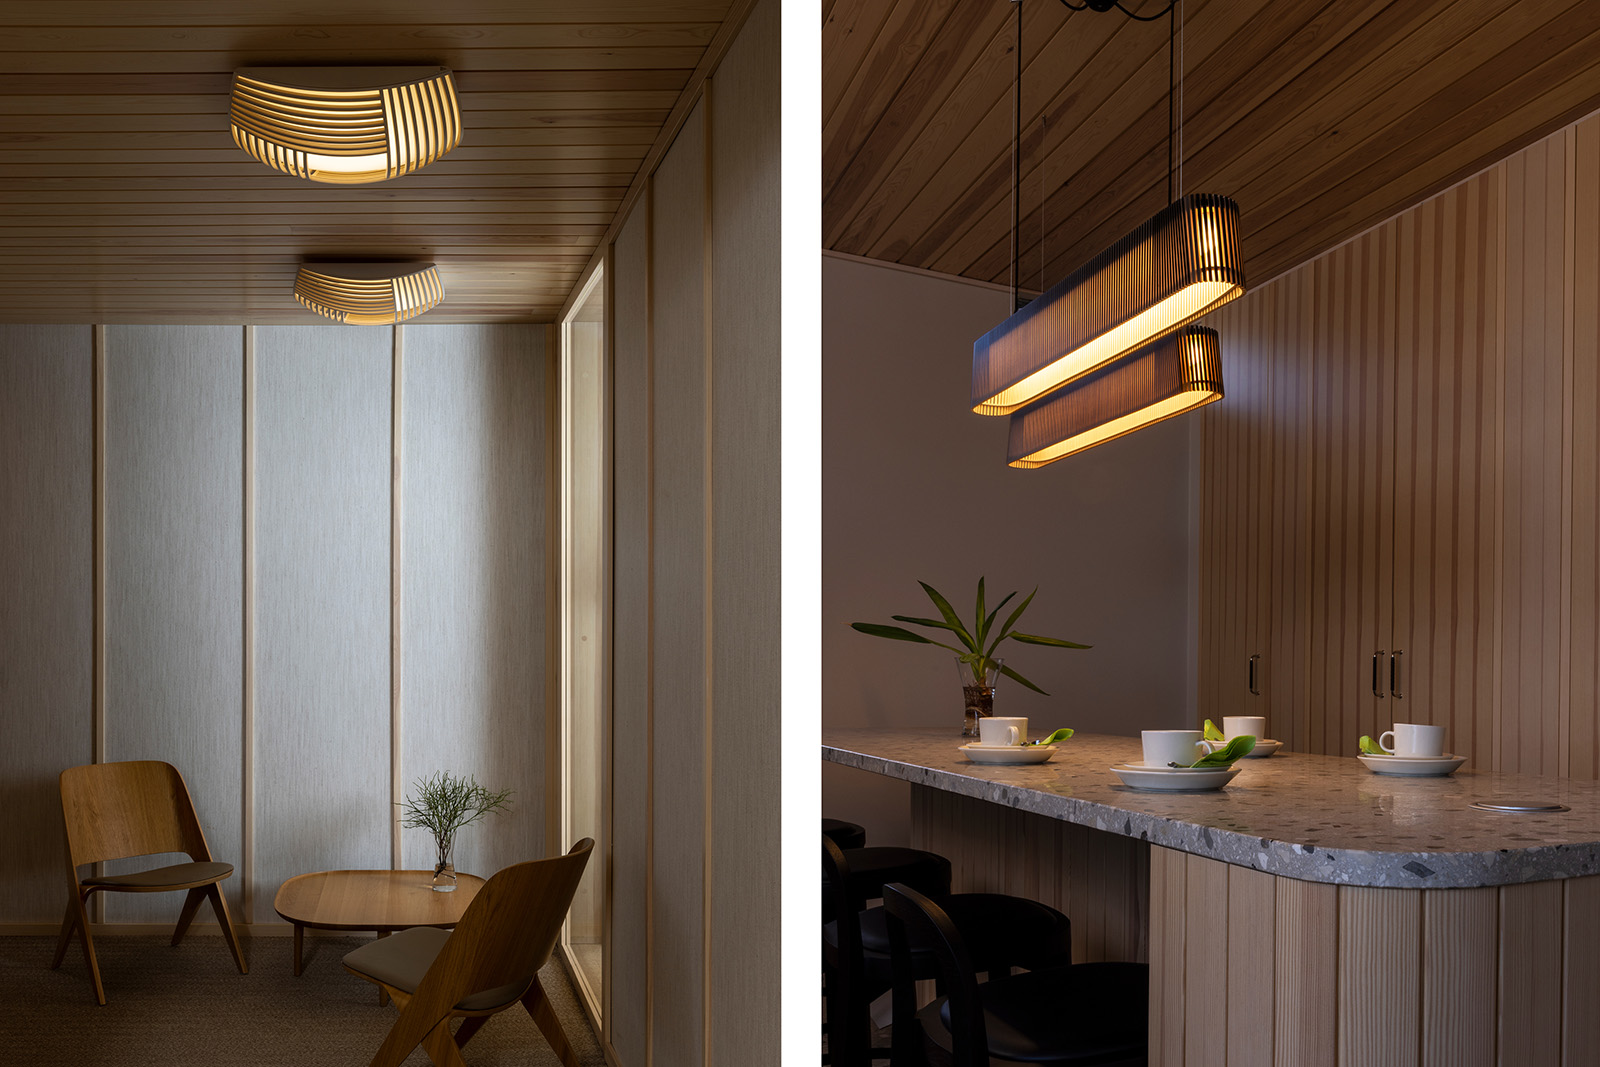 Ceiling lamps above a seating area. Elongated pendant lamps above a kitchen island.